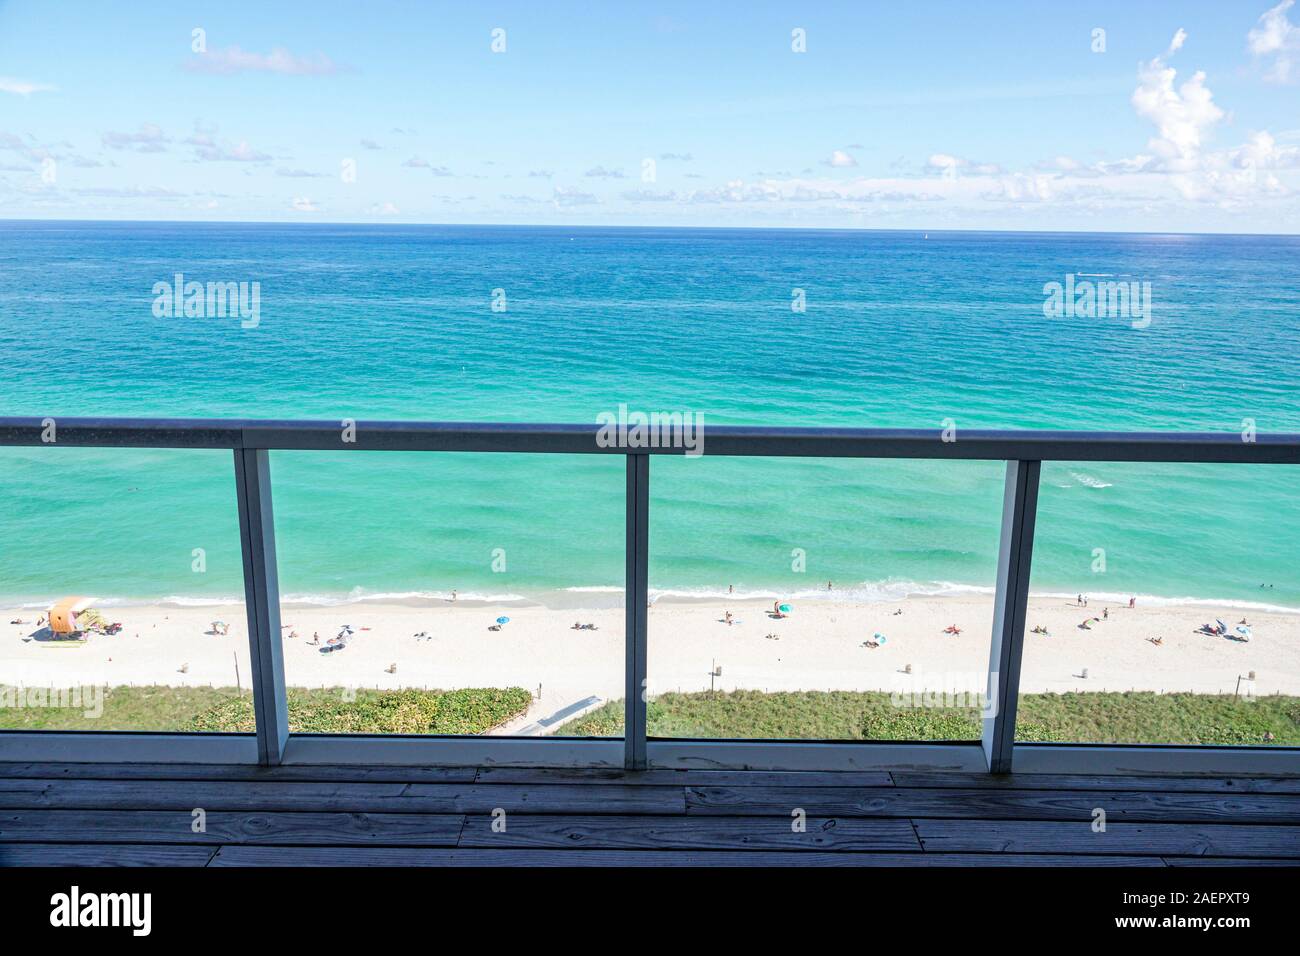 Miami Beach Florida,North Beach,Atlantic Ocean,public oceanfront,shore,view,sand,glass balcony railing,aerial overhead view from above,FL191110010 Stock Photo